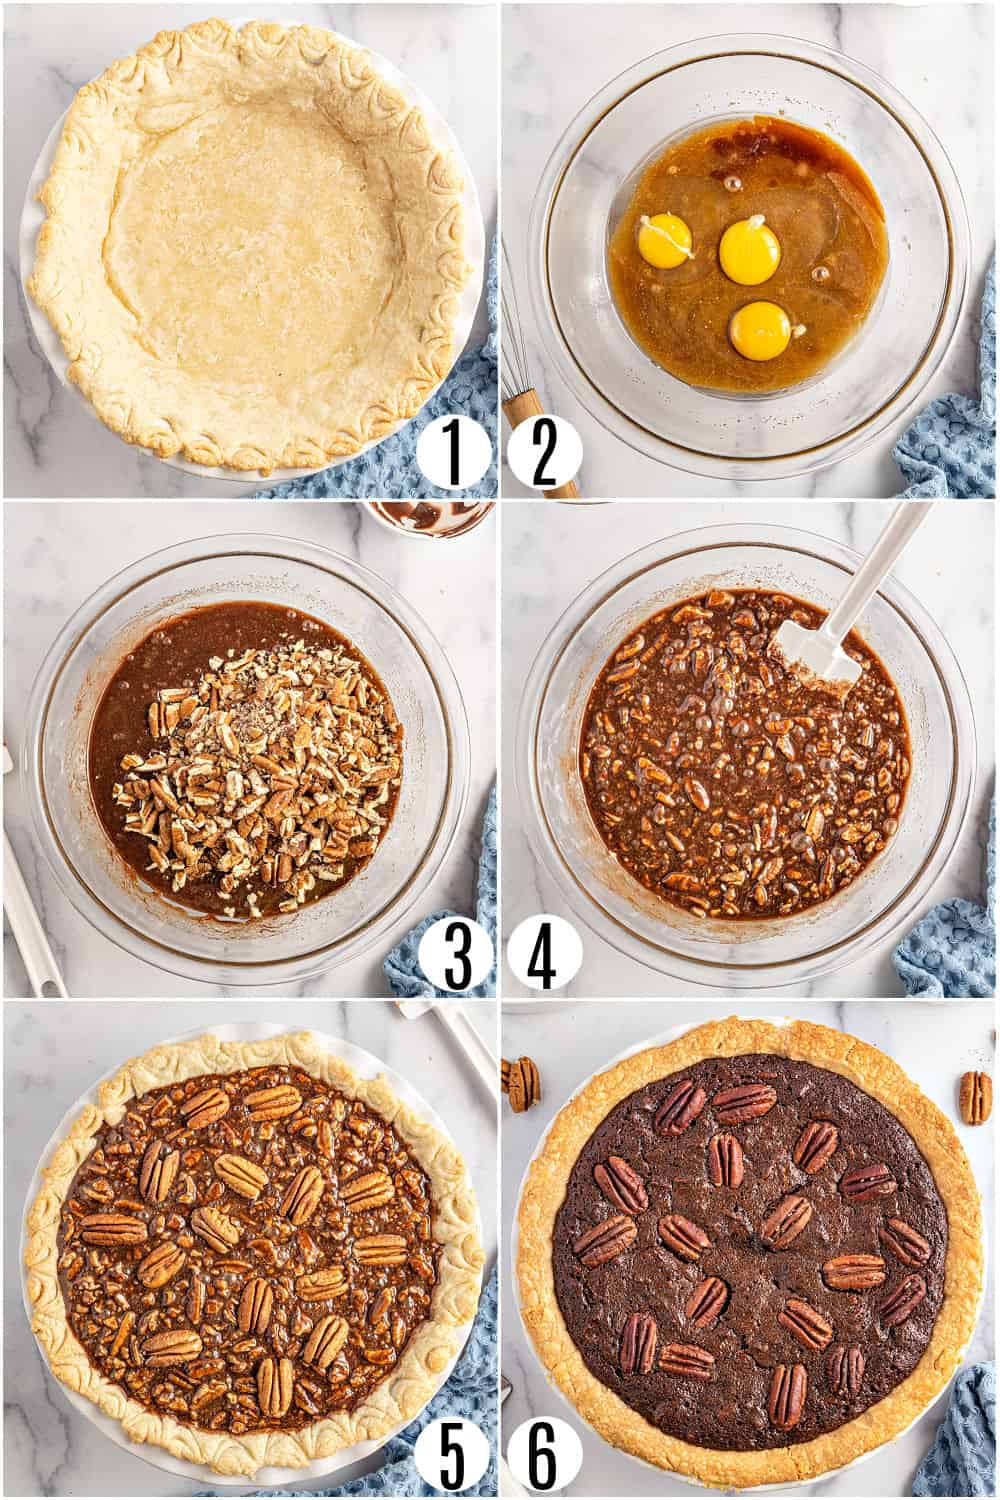 Step by step photos showing how to make chocolate pecan pie.